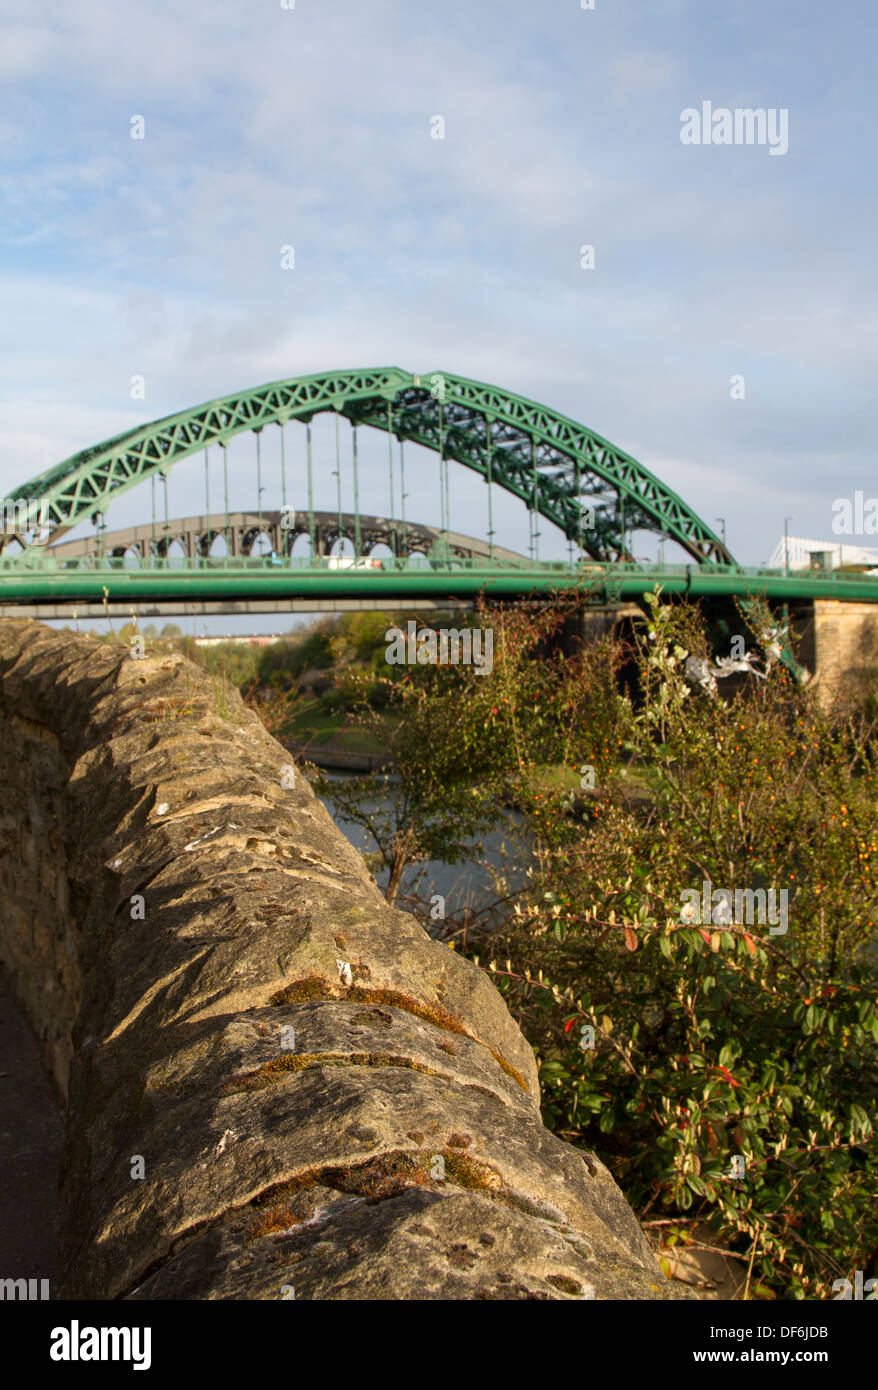 Wearmouth bridge across the River Wear in Sunderland with the rail bridge behind it, North East England Stock Photo